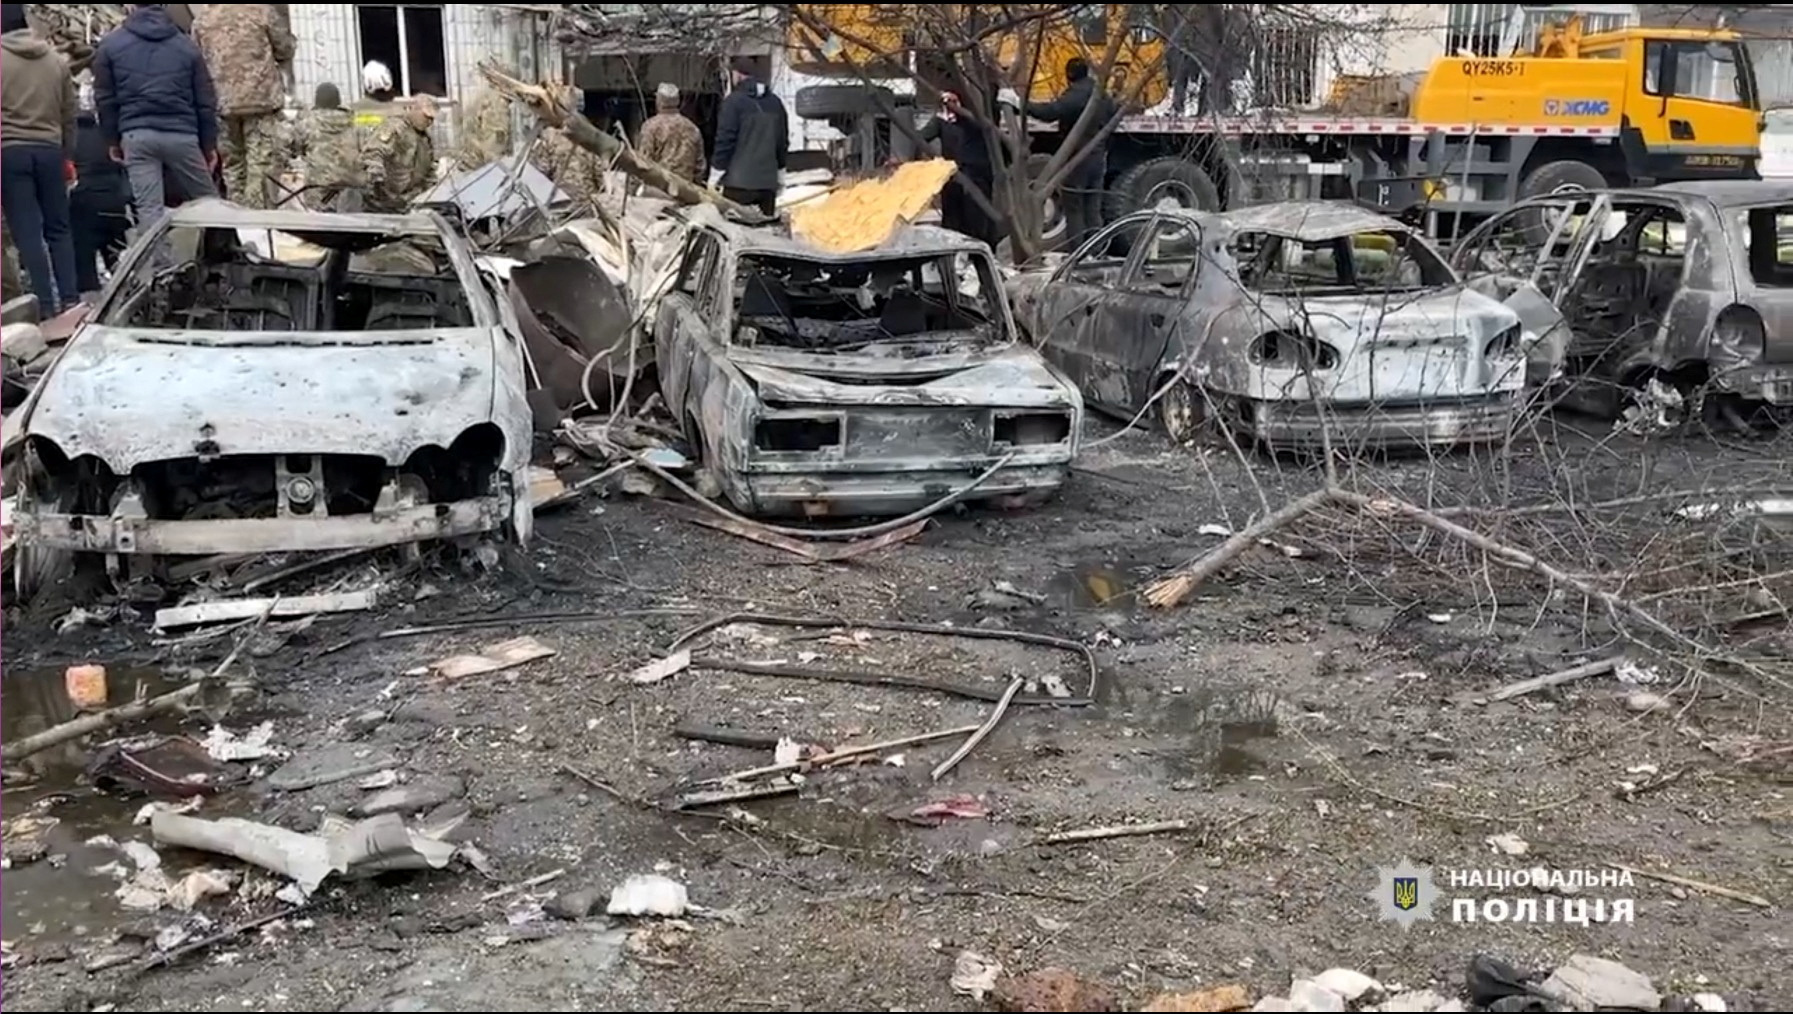 Aftermath of a Russian missile attack in Uman